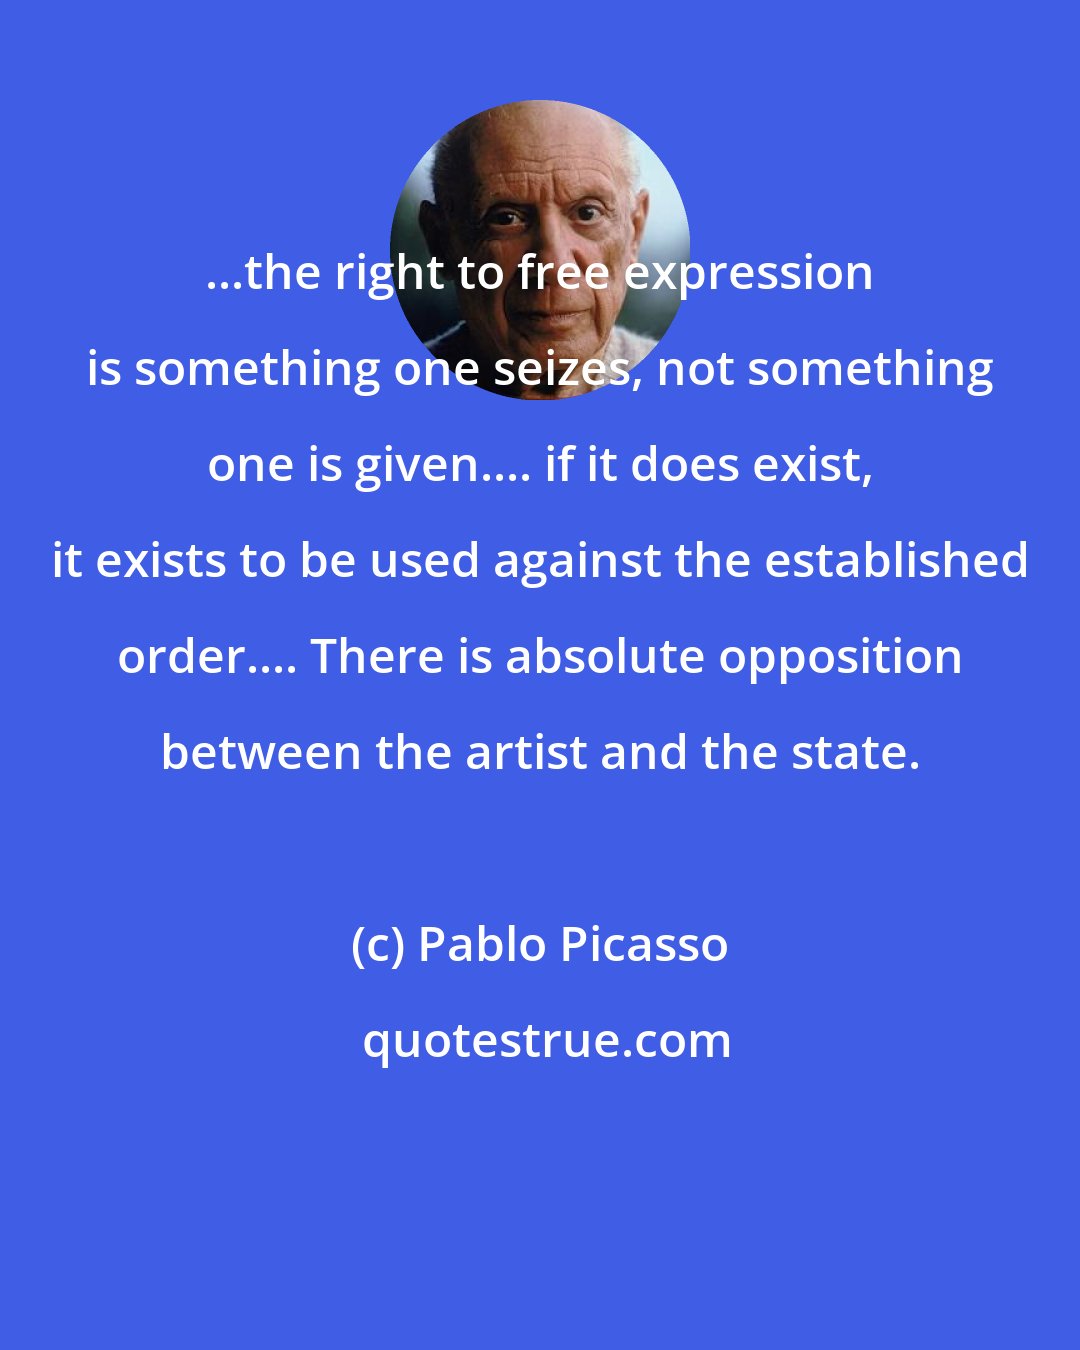 Pablo Picasso: ...the right to free expression is something one seizes, not something one is given.... if it does exist, it exists to be used against the established order.... There is absolute opposition between the artist and the state.